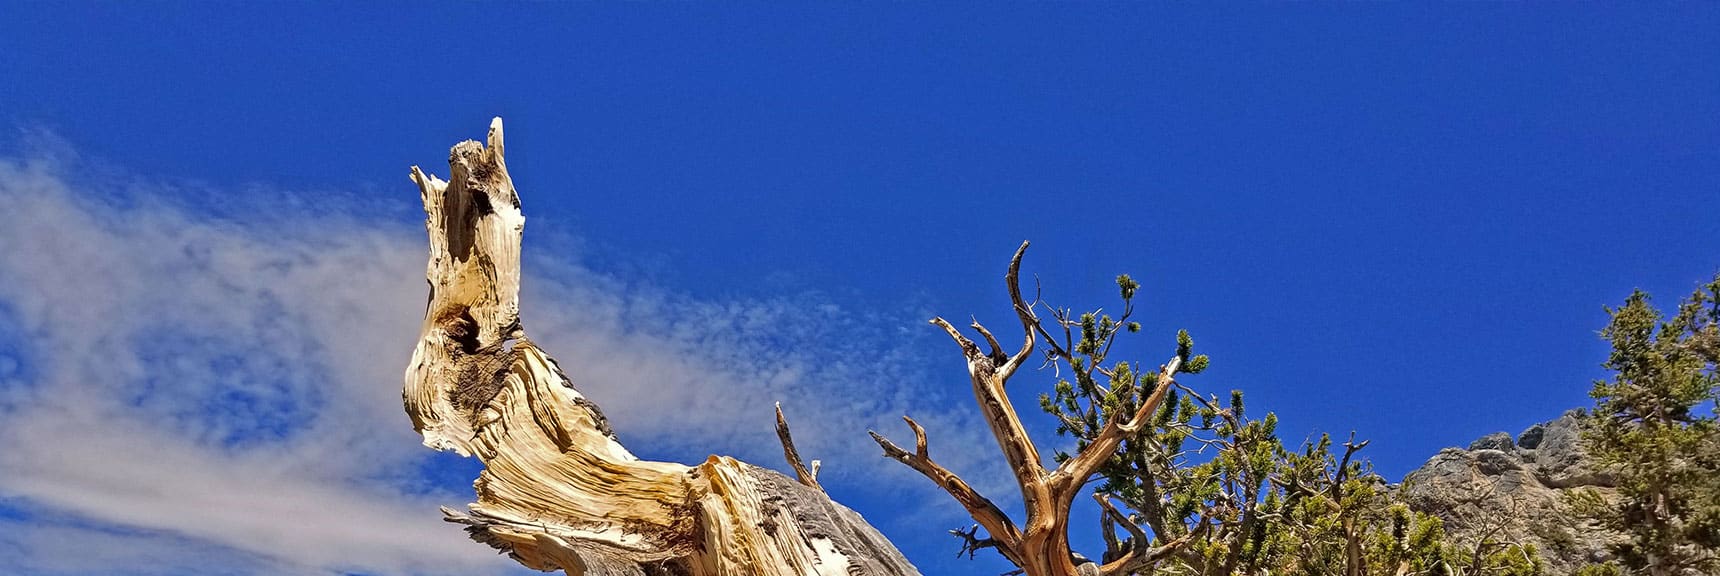 Blue Sky, Golden Clouds, Bronze Wood, Green Pine Branches, Gray Rock...a Symphony of Color! | The Sisters South | Lee Canyon | Mt Charleston Wilderness | Spring Mountains, Nevada